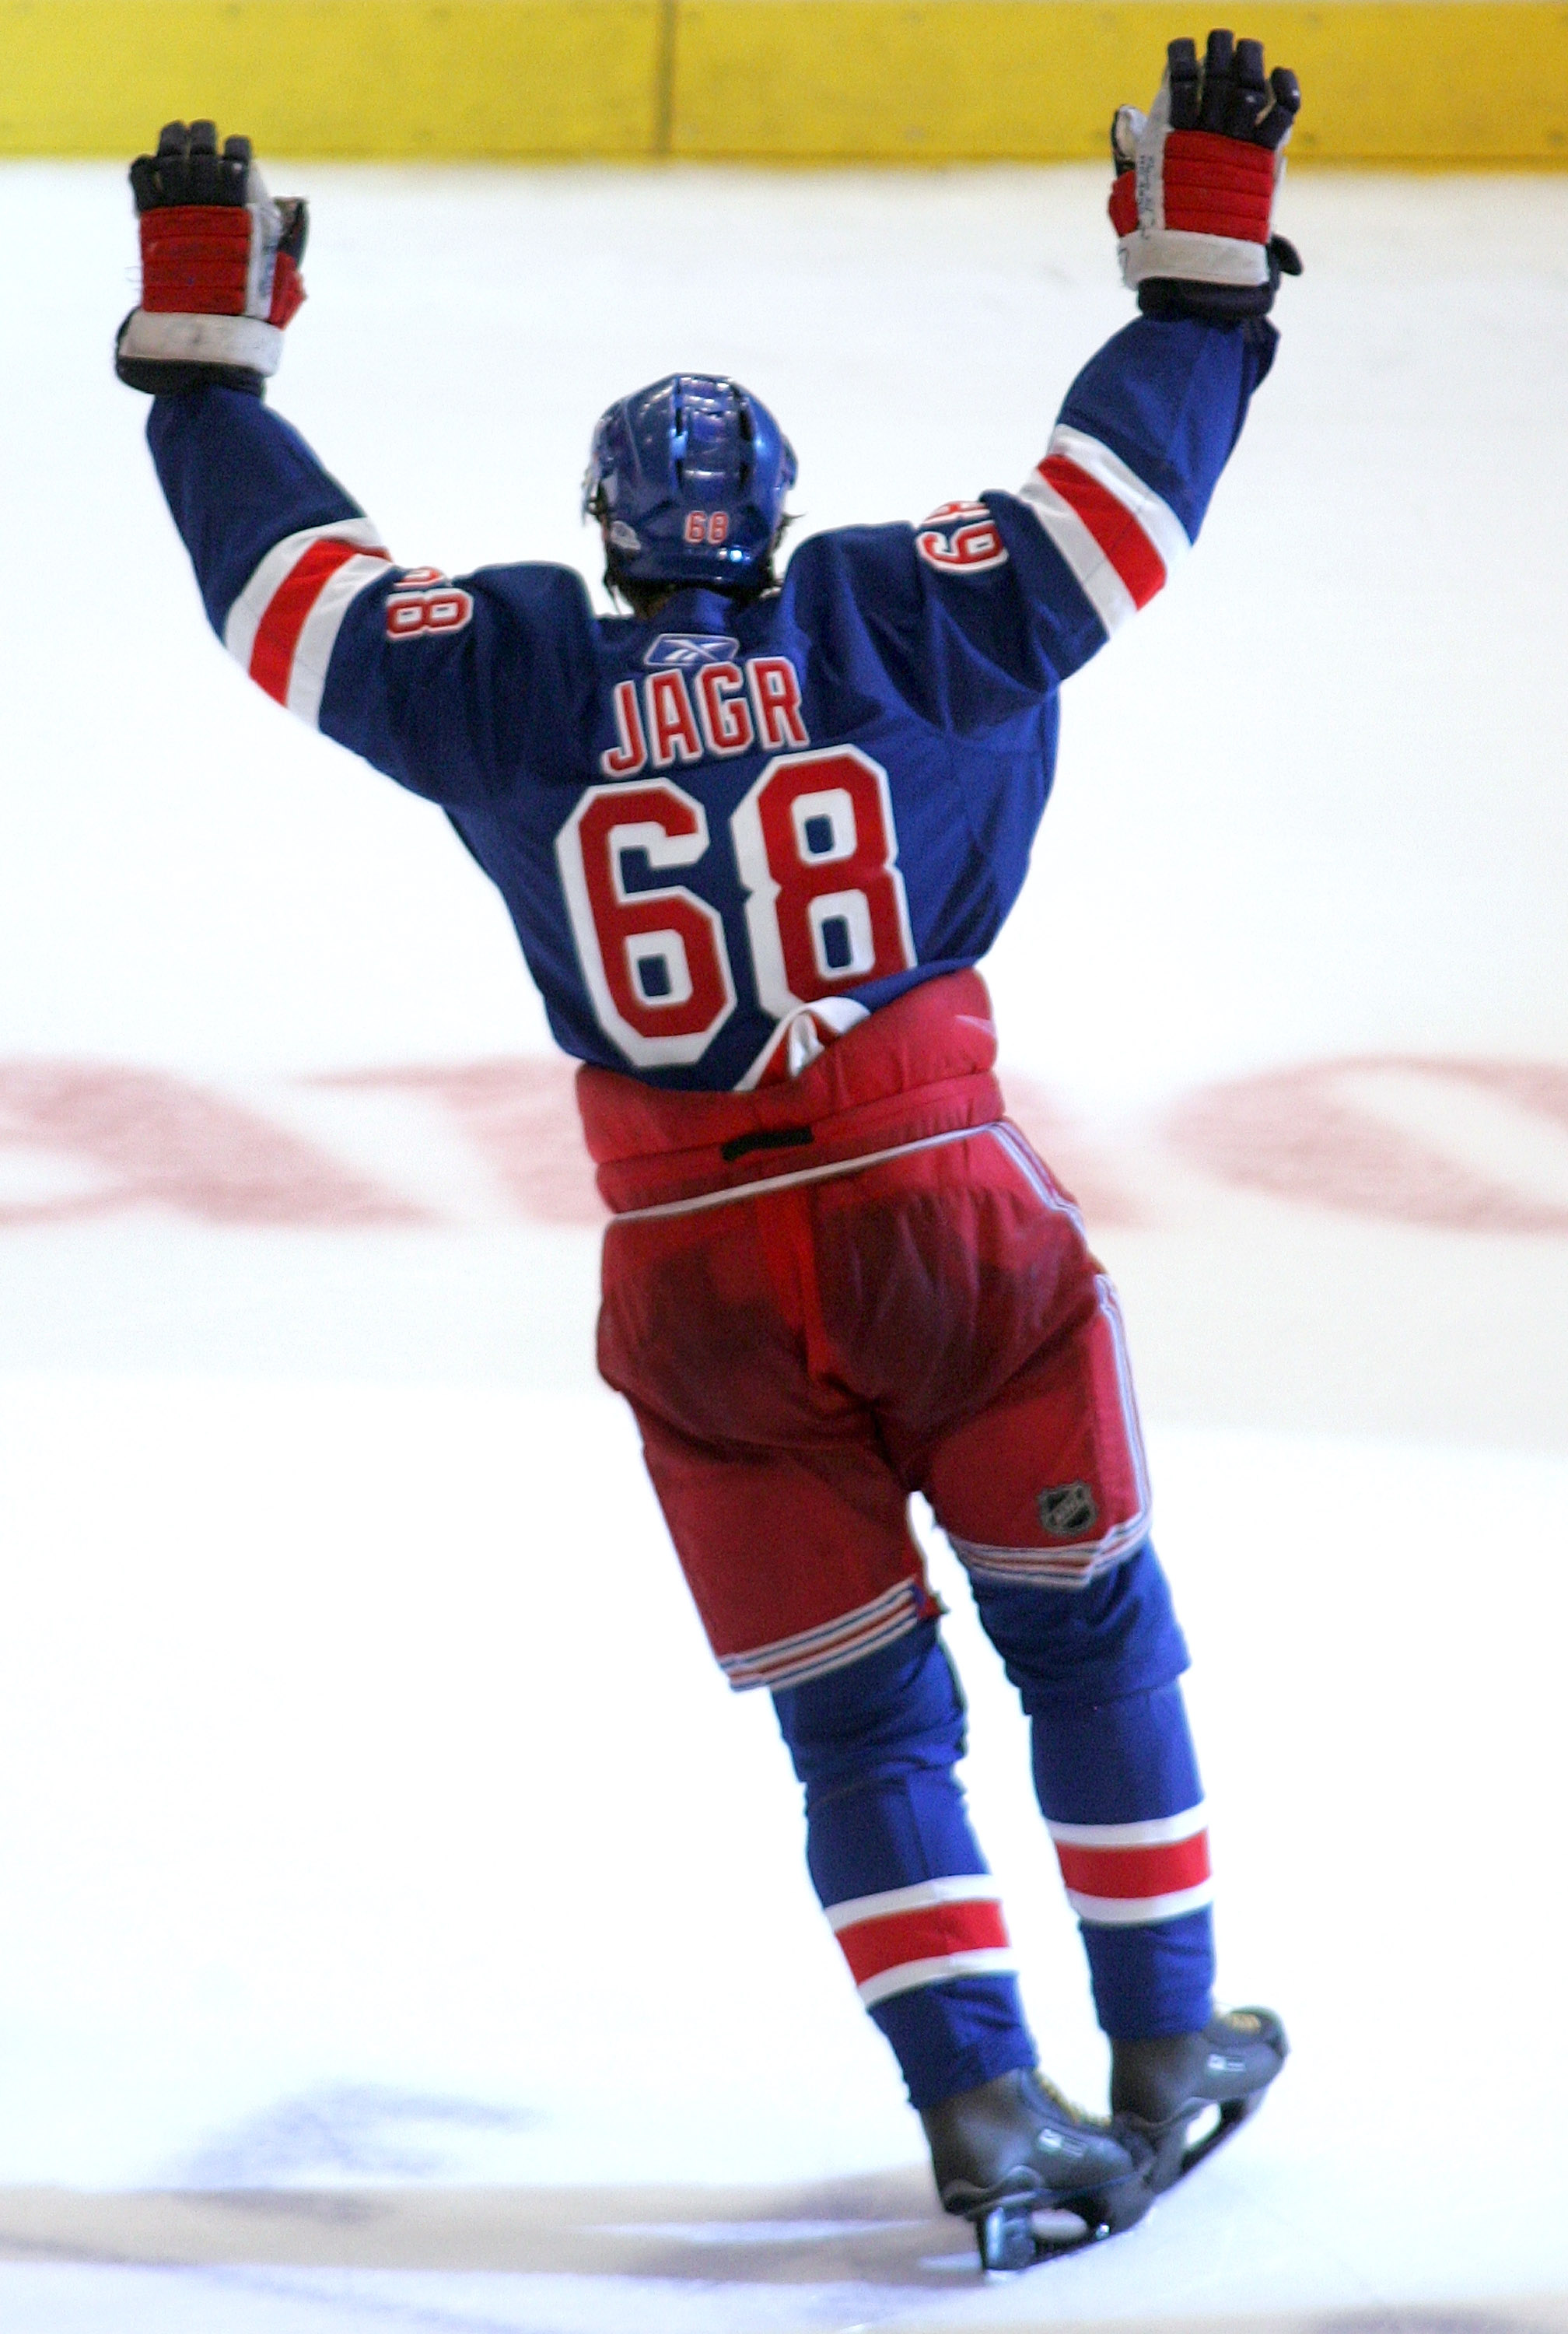 Greatest All-Time New York Rangers by Jersey Number (Part 2: 80-89) - Belly  Up Sports